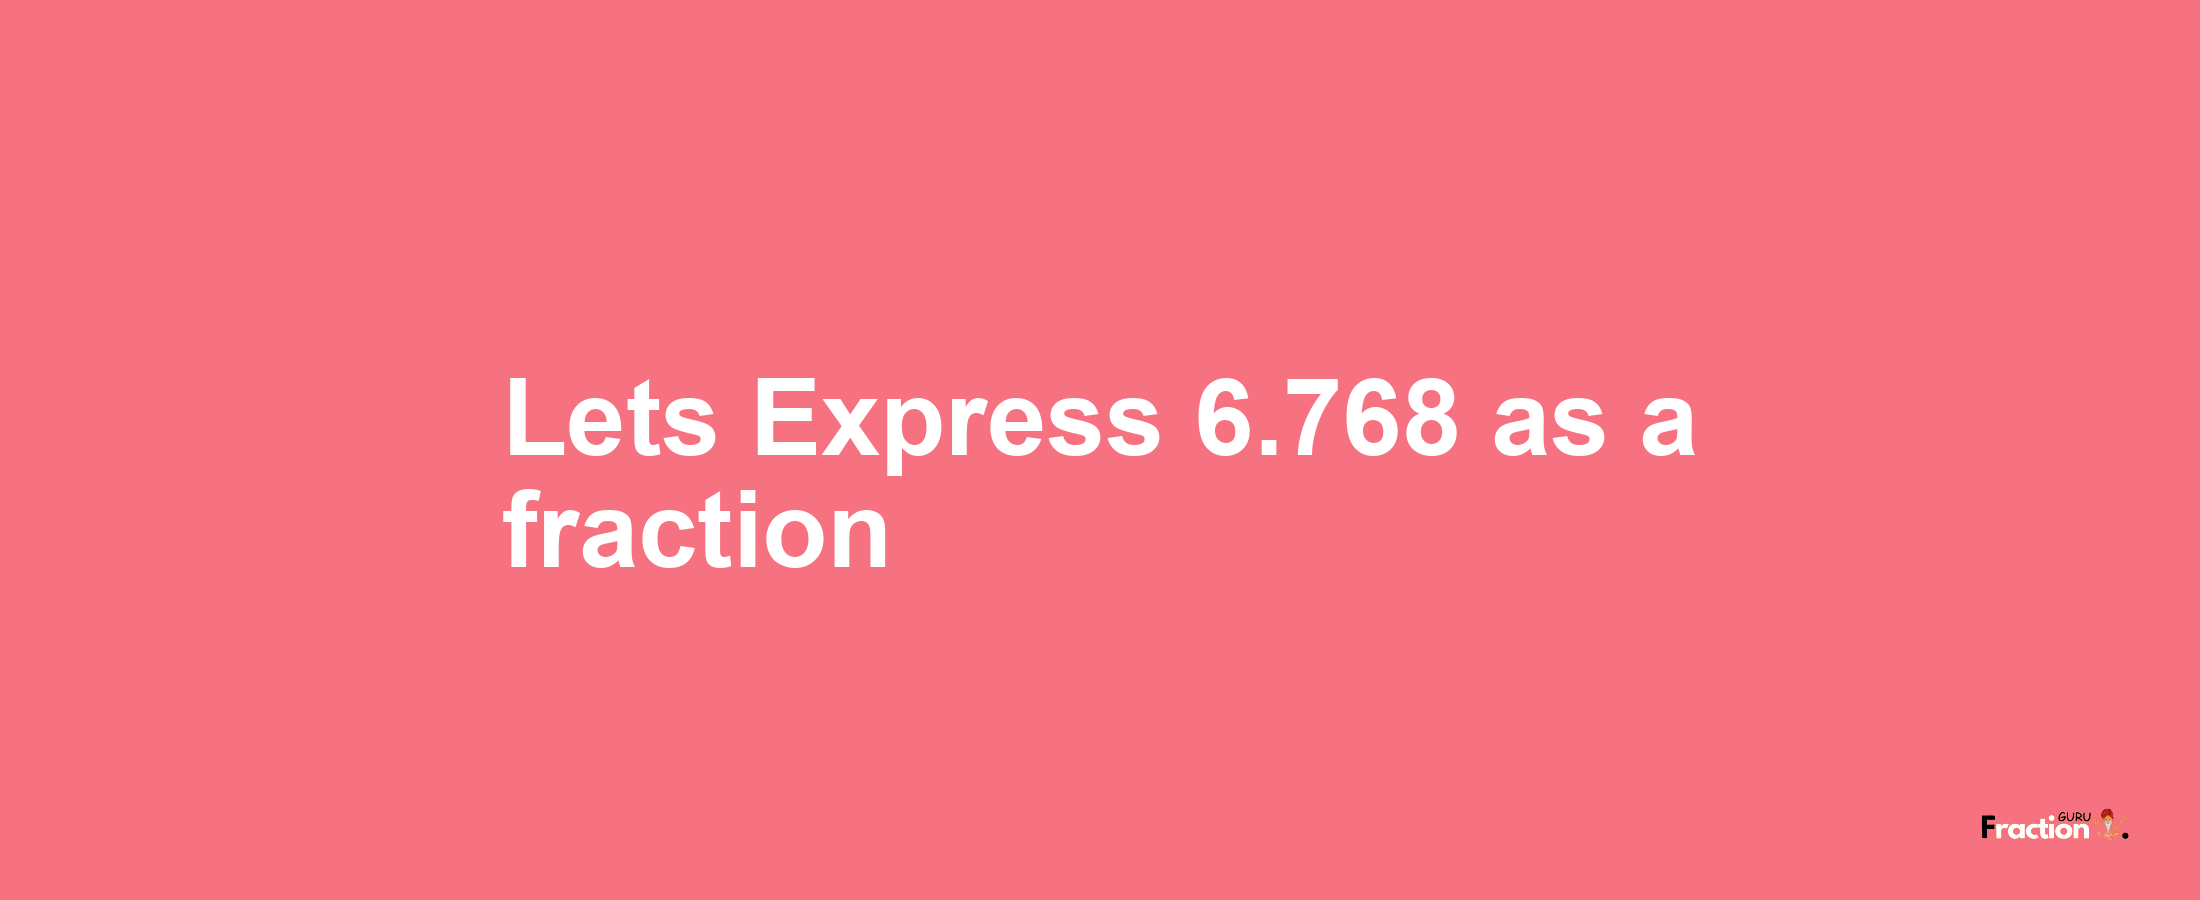 Lets Express 6.768 as afraction